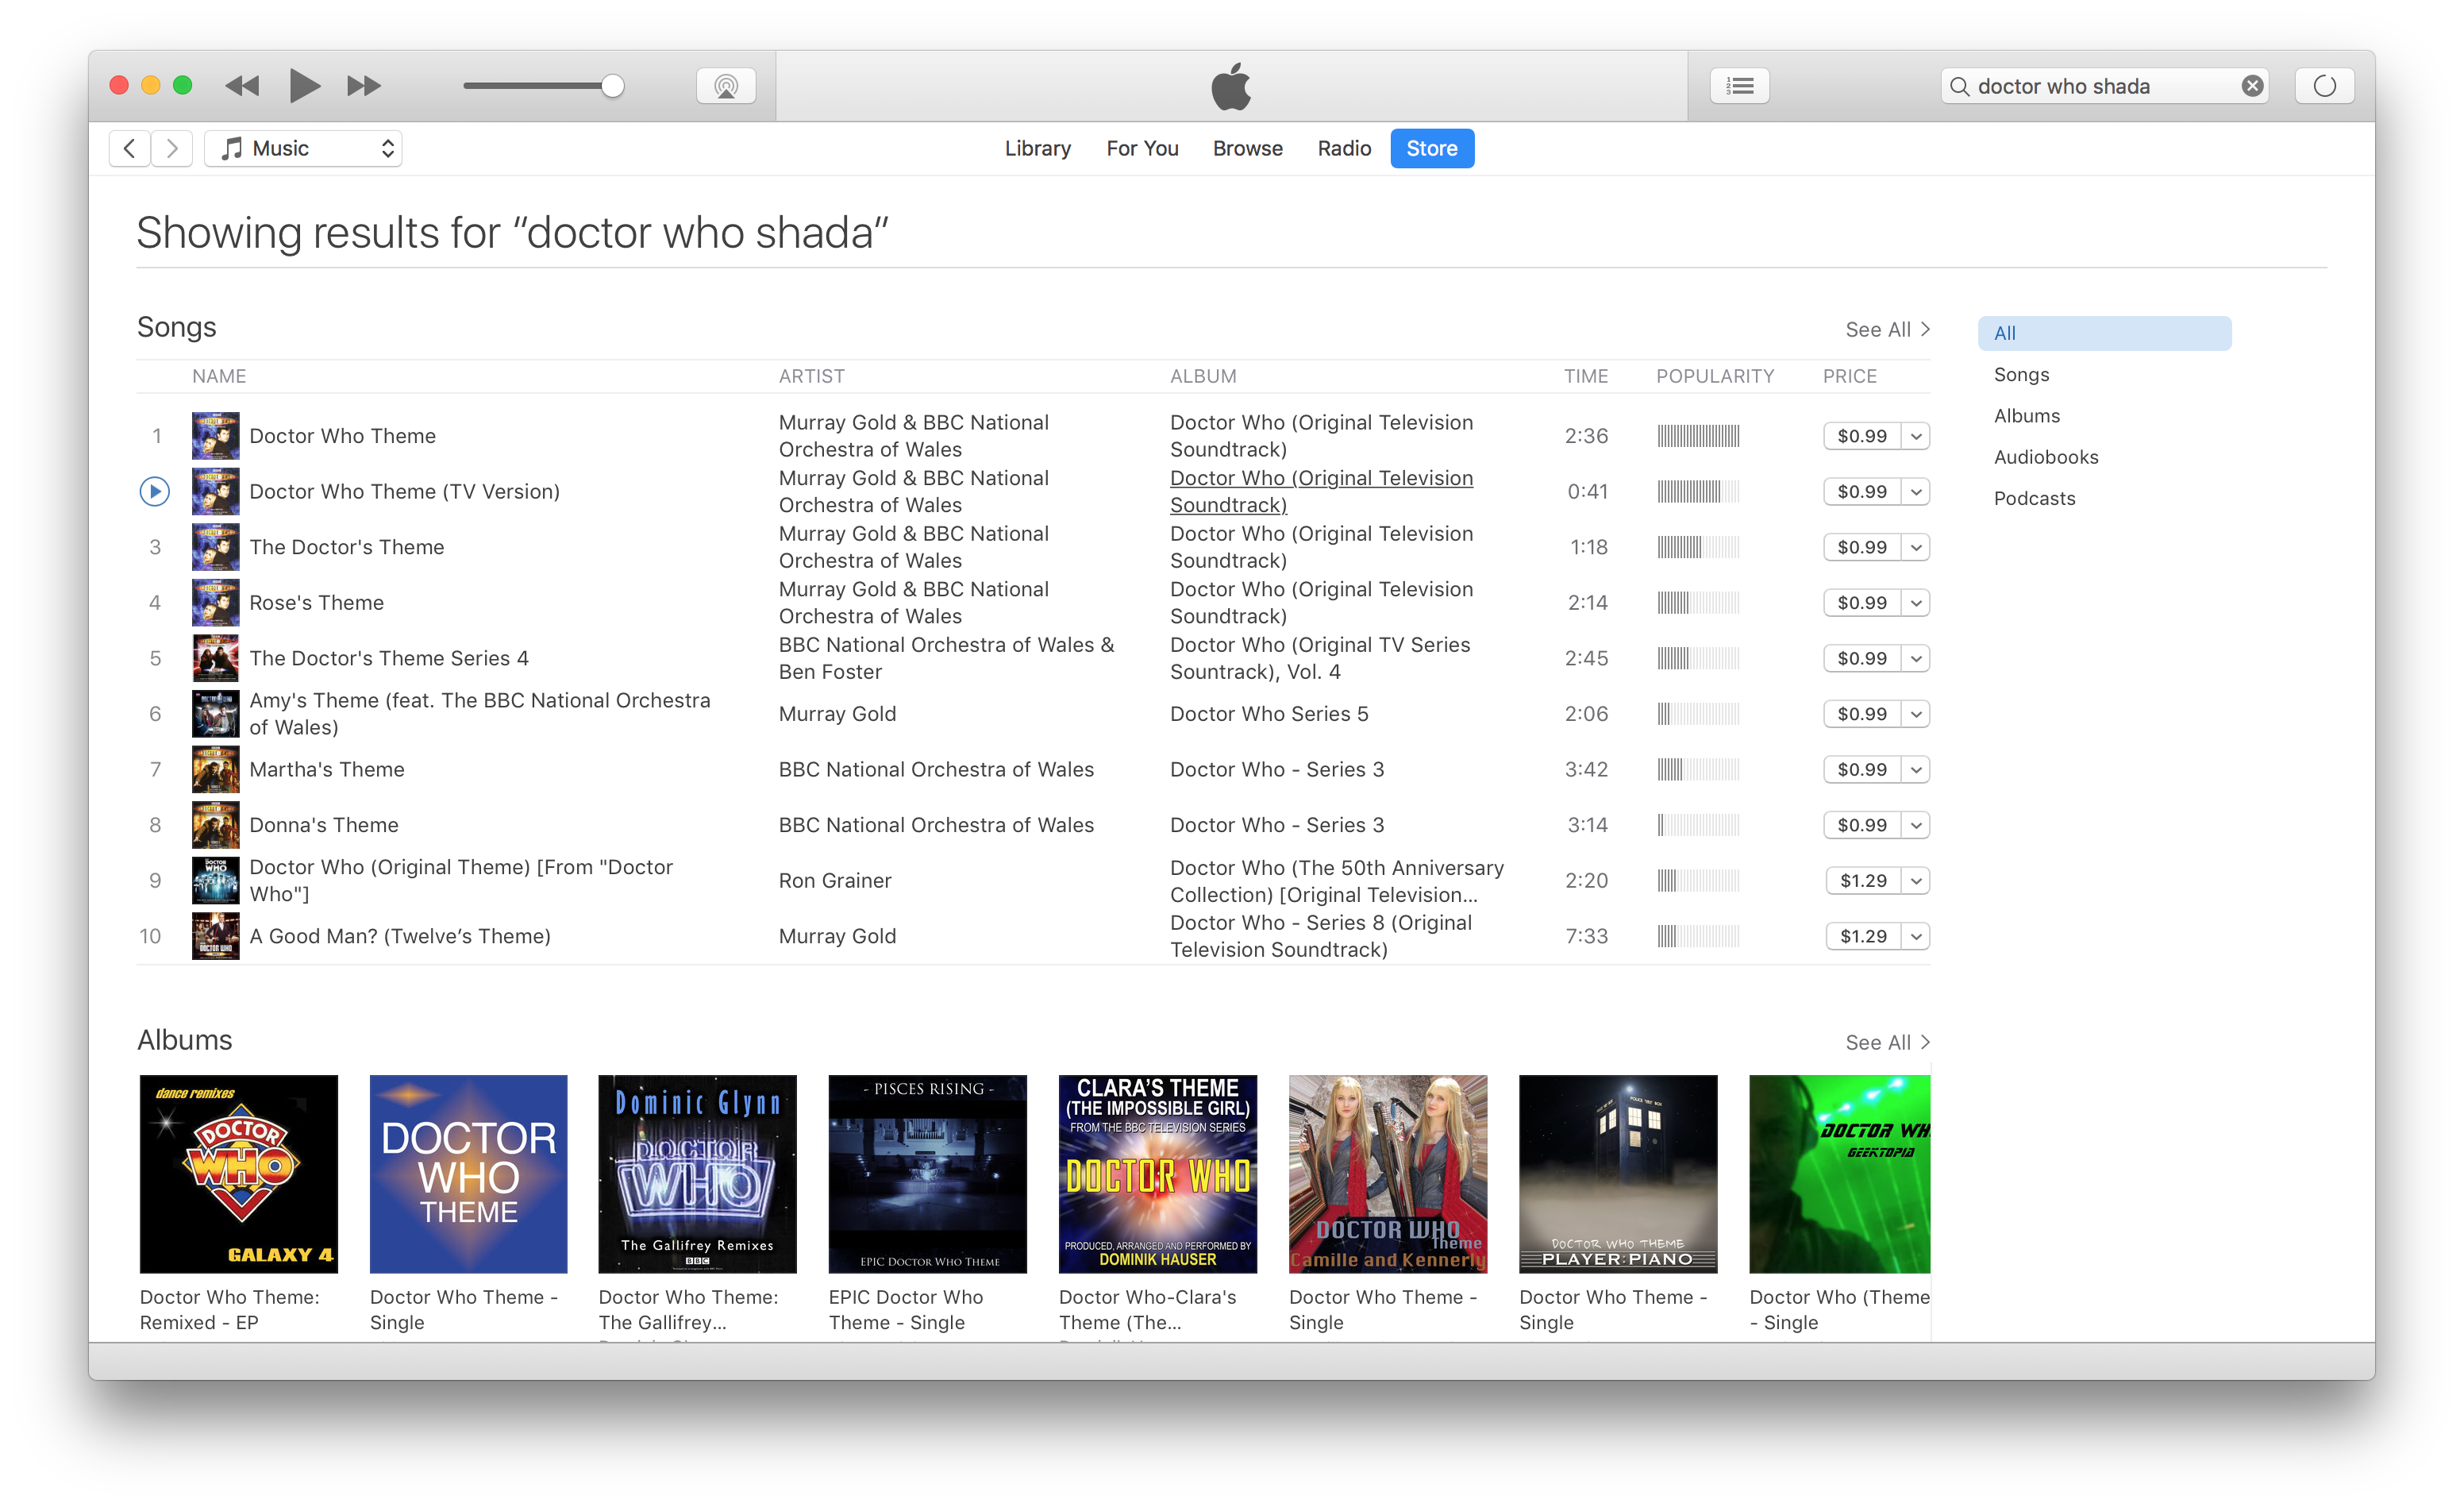 Search results for "doctor who shada" in iTunes